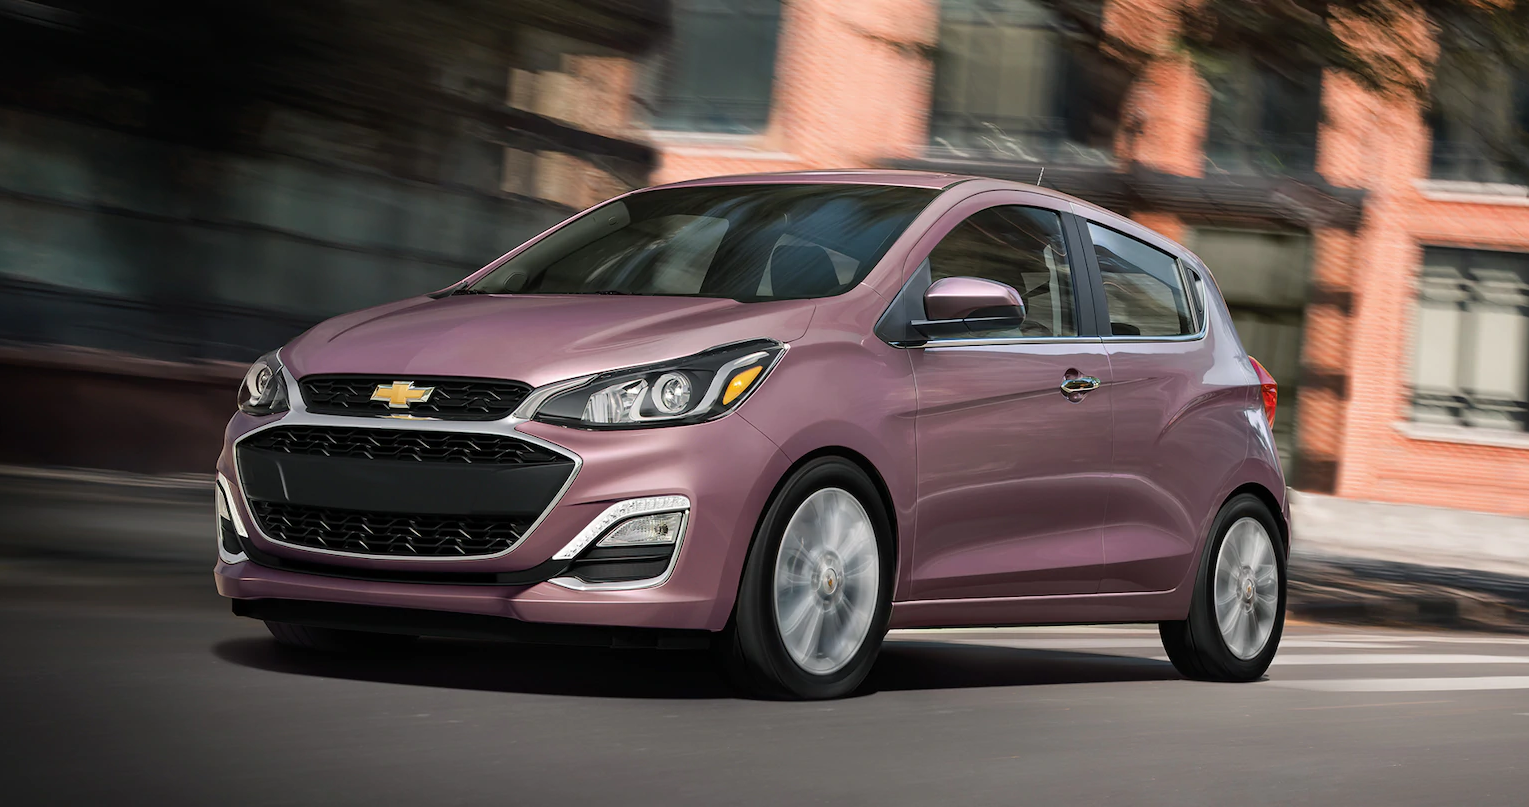 2020 Chevrolet Spark Overview The News Wheel